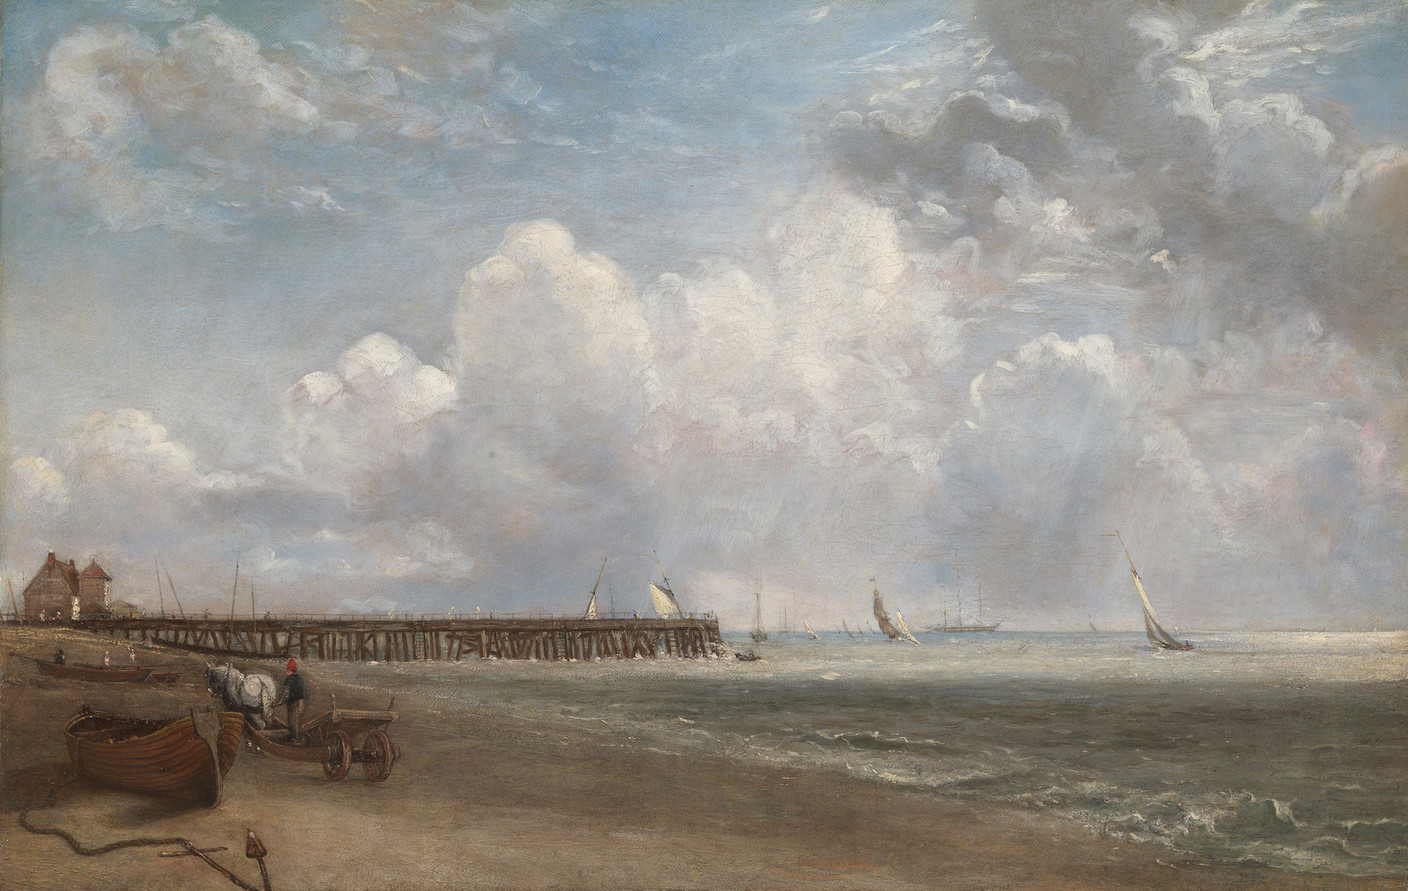 John Constable, Yarmouth Jetty, 1824, huile sur toile, collection du Tate. (Photo: Tate)